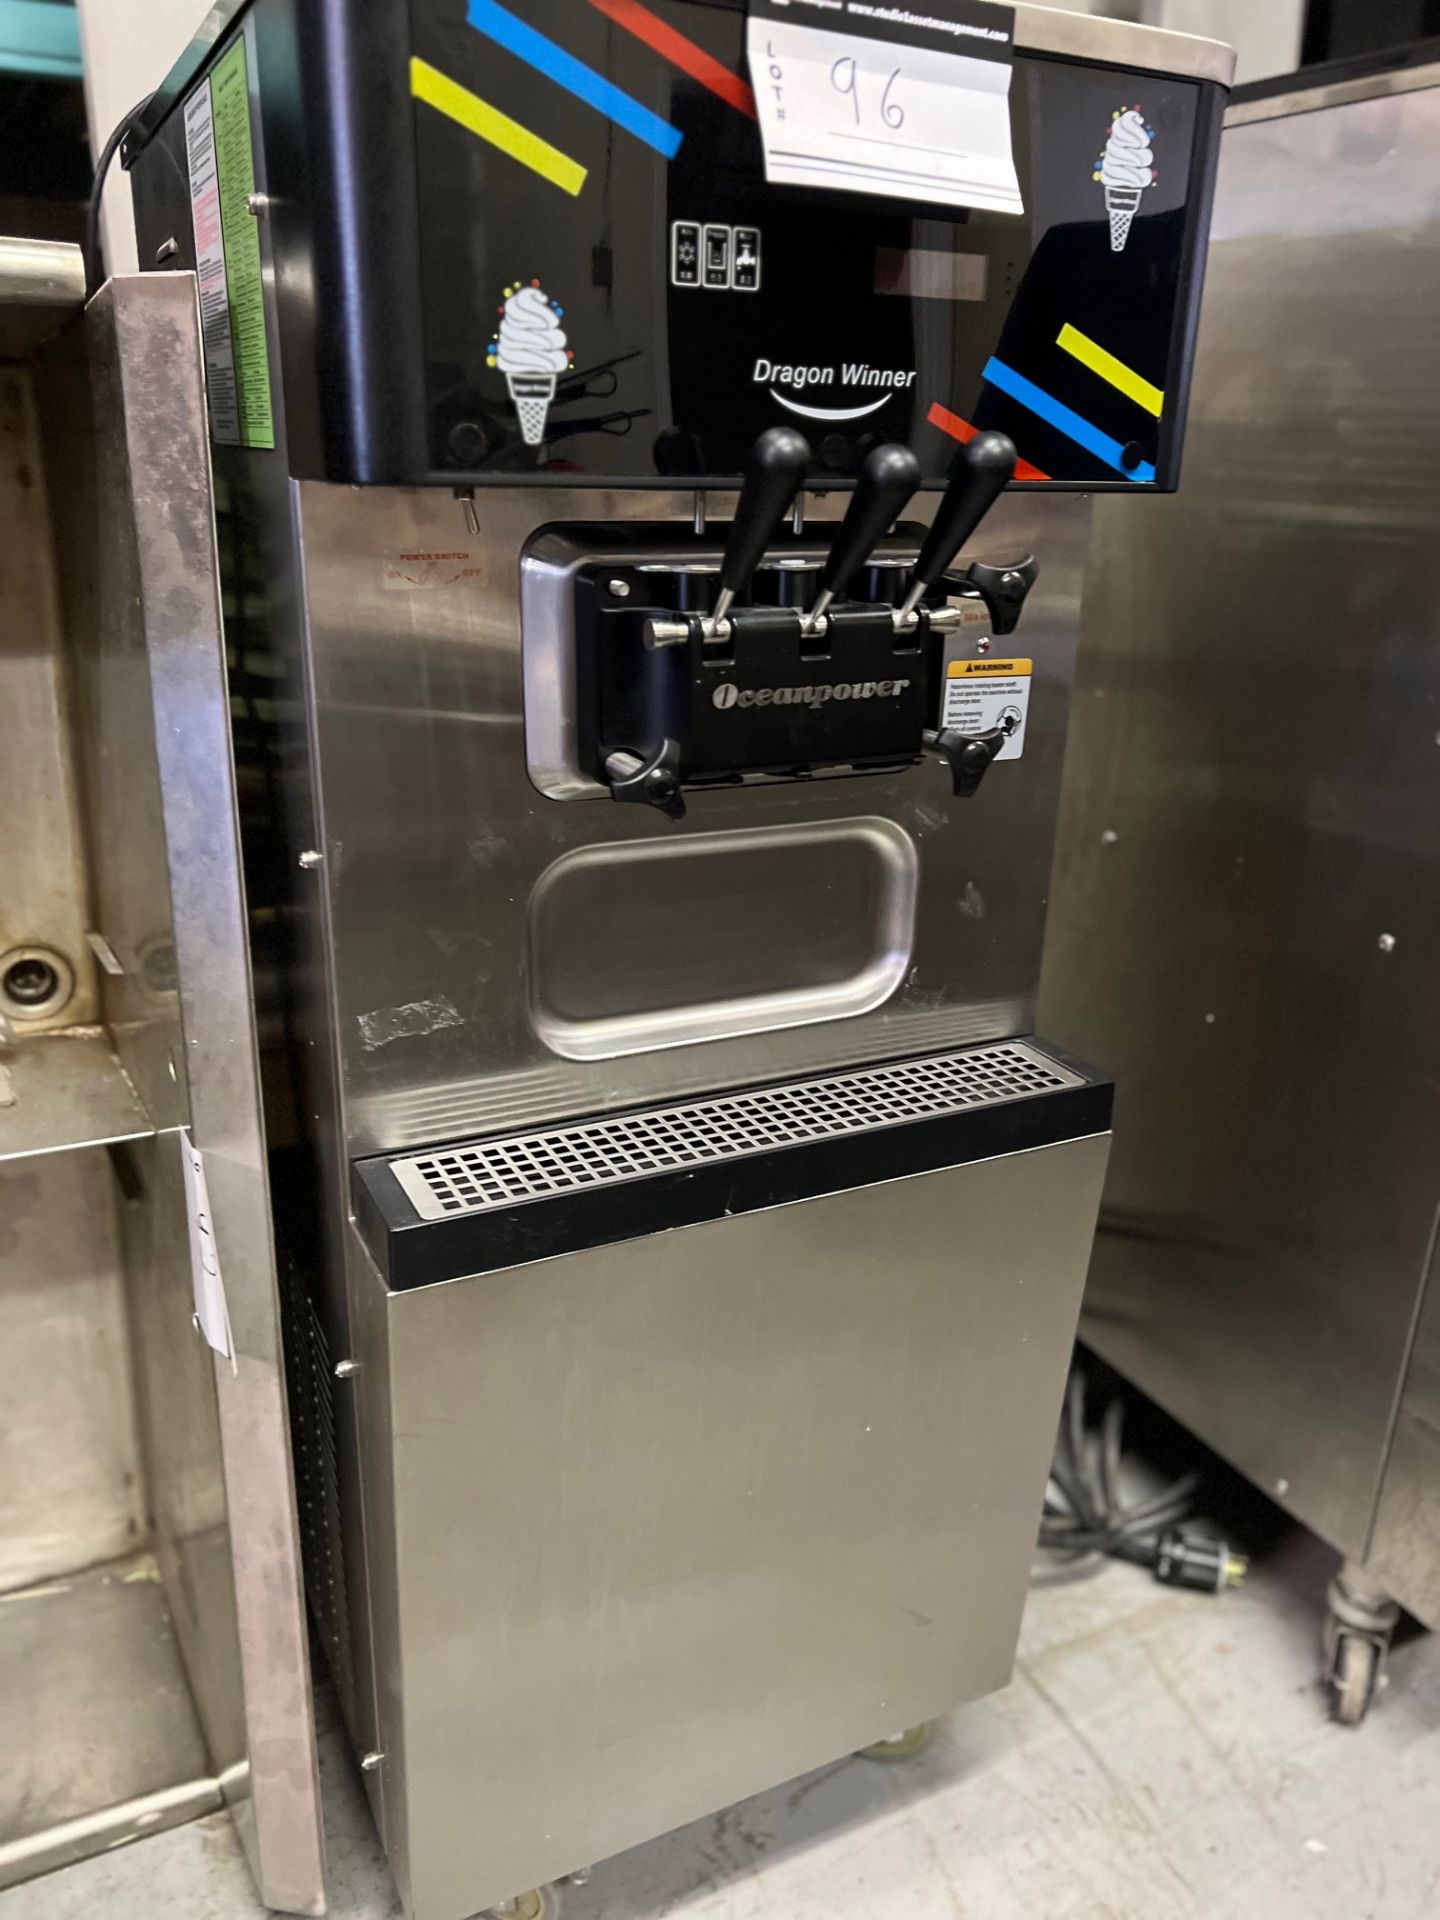 OCEANPOWER DRAGON WINNER COMMERCIAL SOT ICE CREAM MACHINE, MODEL DW138 TCP, 2018, (NOT WORKING) - Image 4 of 4